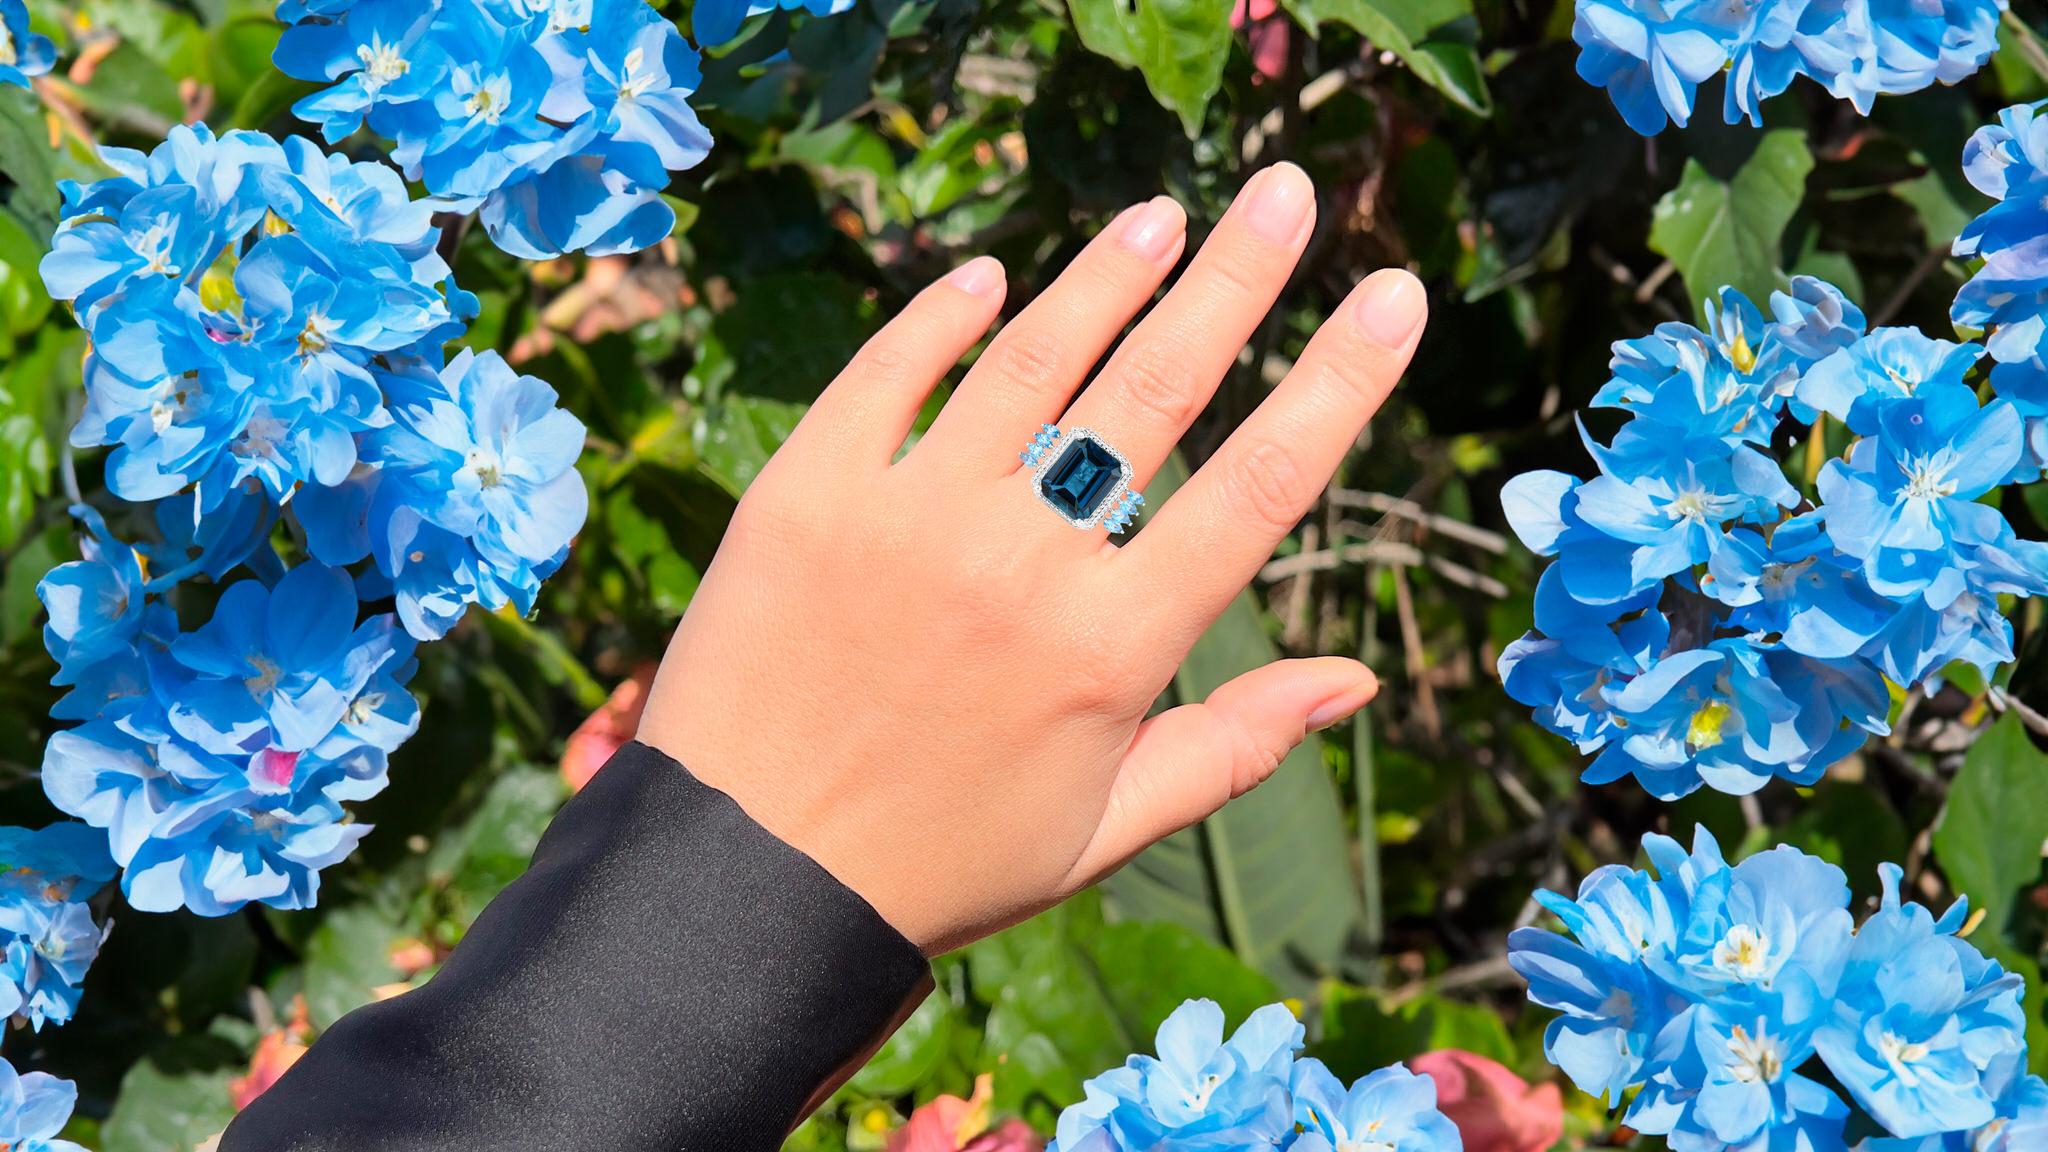 It comes with the Gemological Appraisal by GIA GG/AJP
All Gemstones are Natural
London Blue Topaz = 7.50 Carat
8 Swiss Blue Topazes = 0.75 Carats
Metal: Rhodium Plated Sterling Silver
Ring Size: 9* US
*It can be resized complimentary